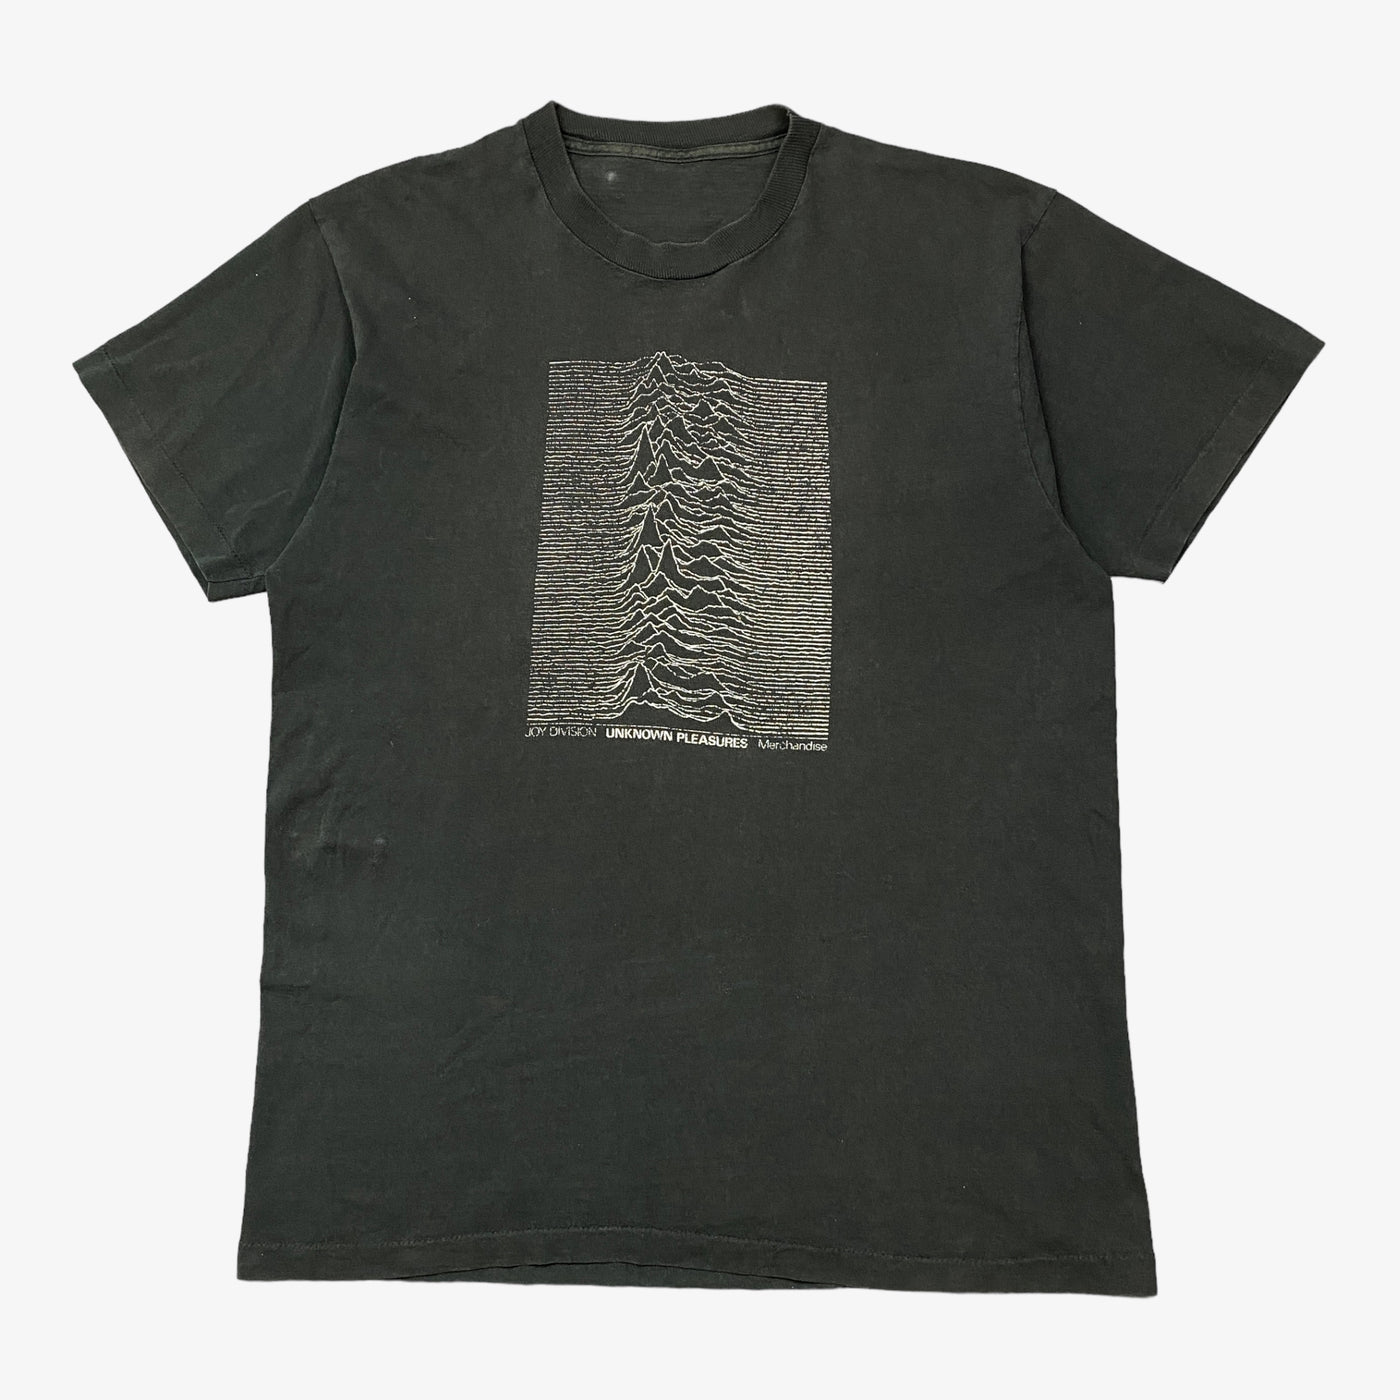 EARLY 90S JOY DIVISION T-SHIRT